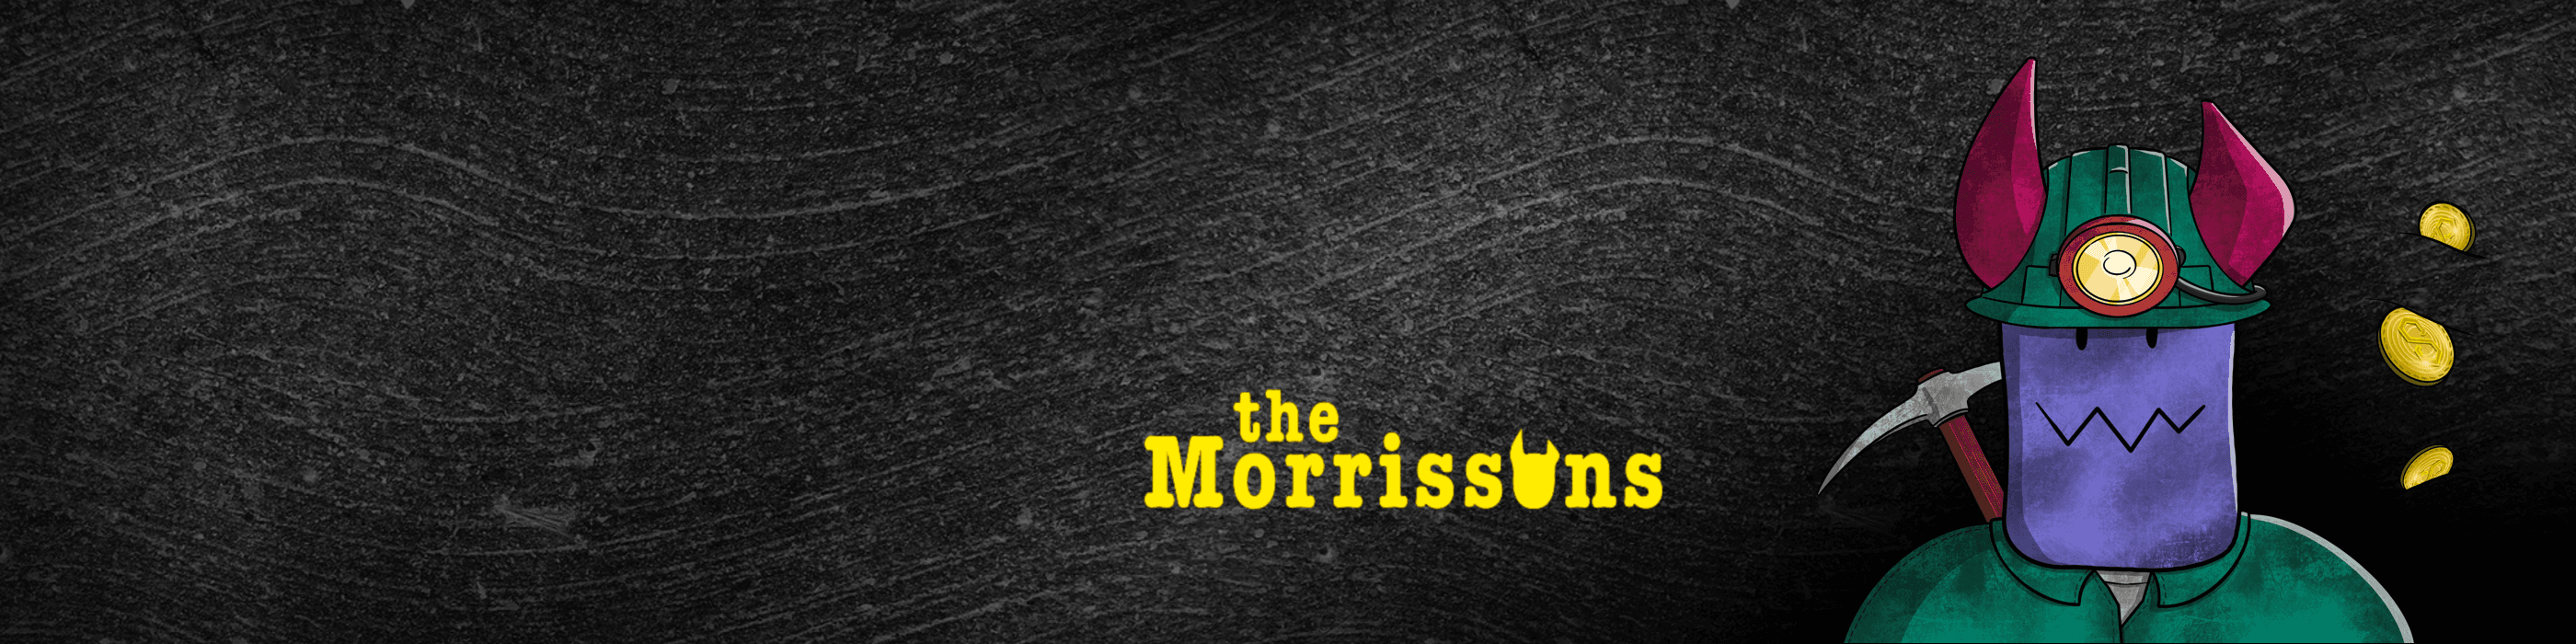 The Morrissons